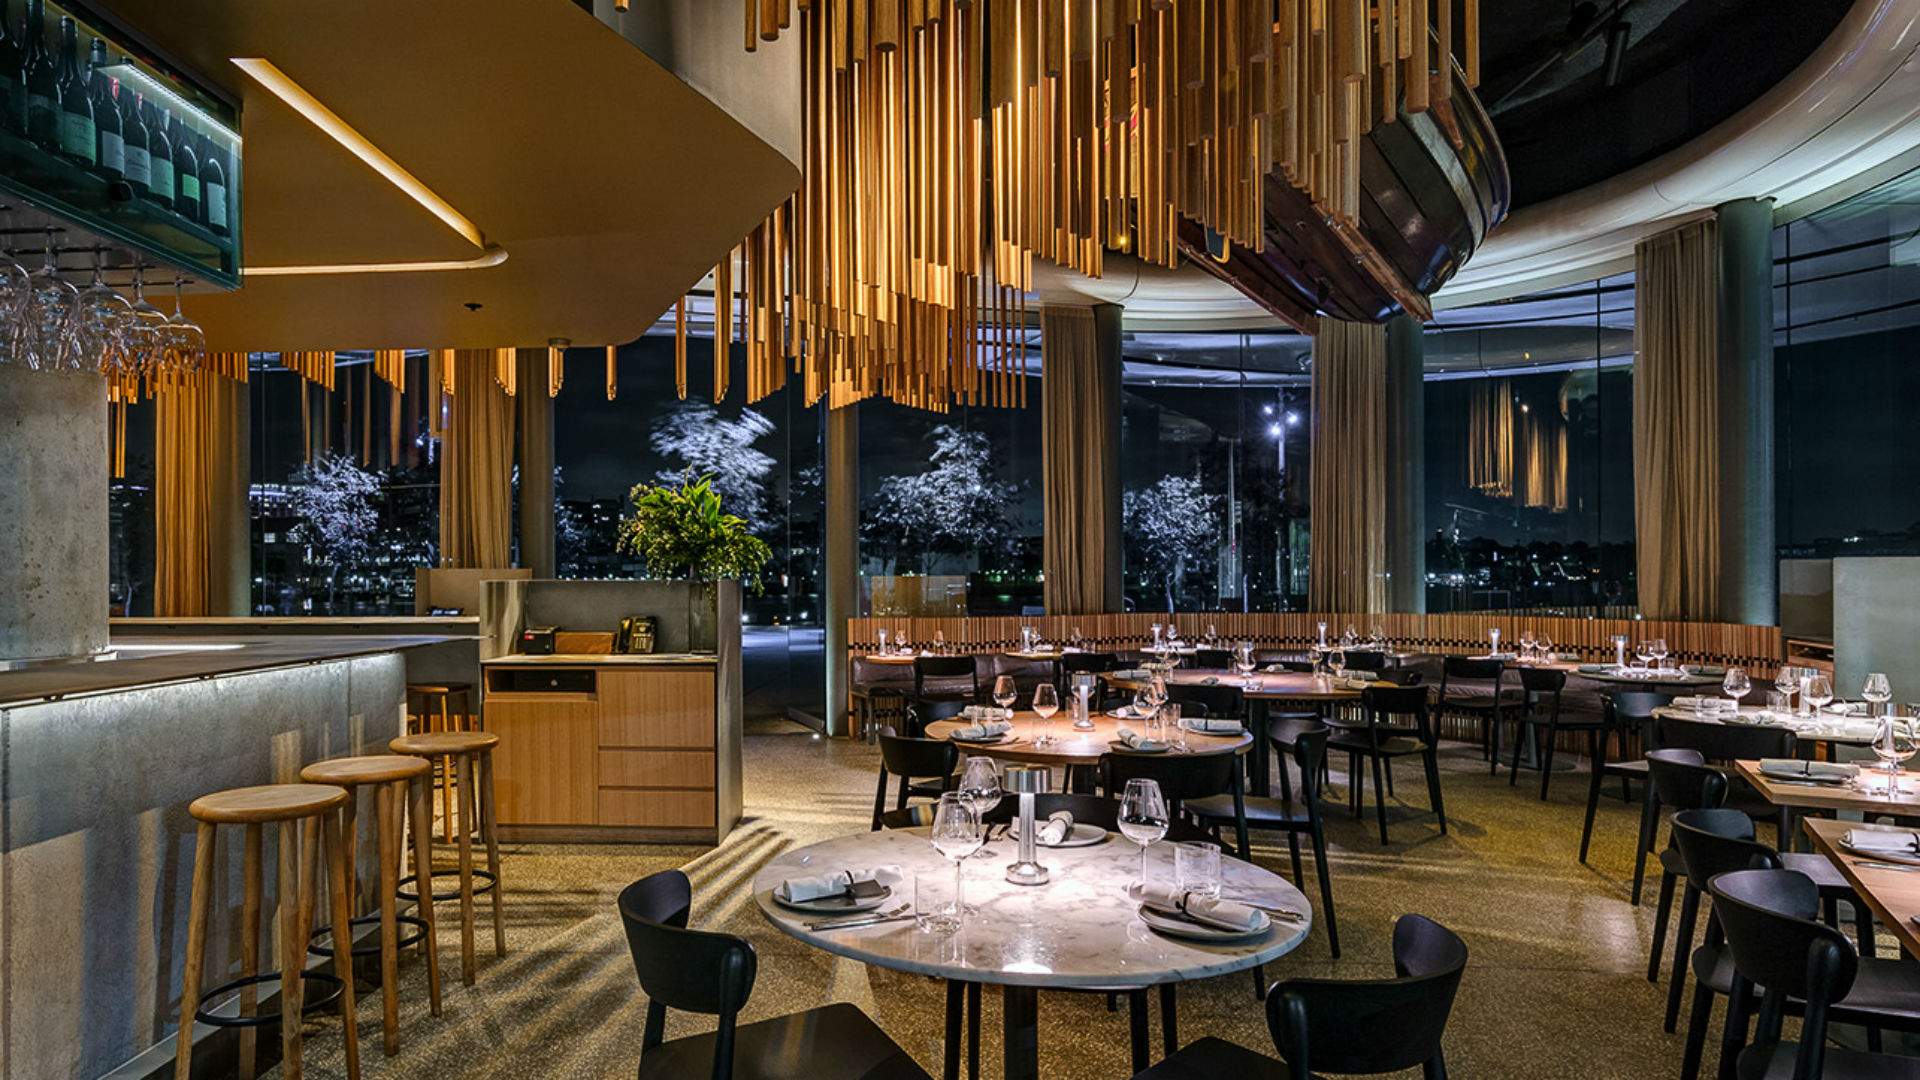 The main dining room at Cirrus Dining in Barangaroo, Sydney — one of the best seafood restaurants in Sydney.